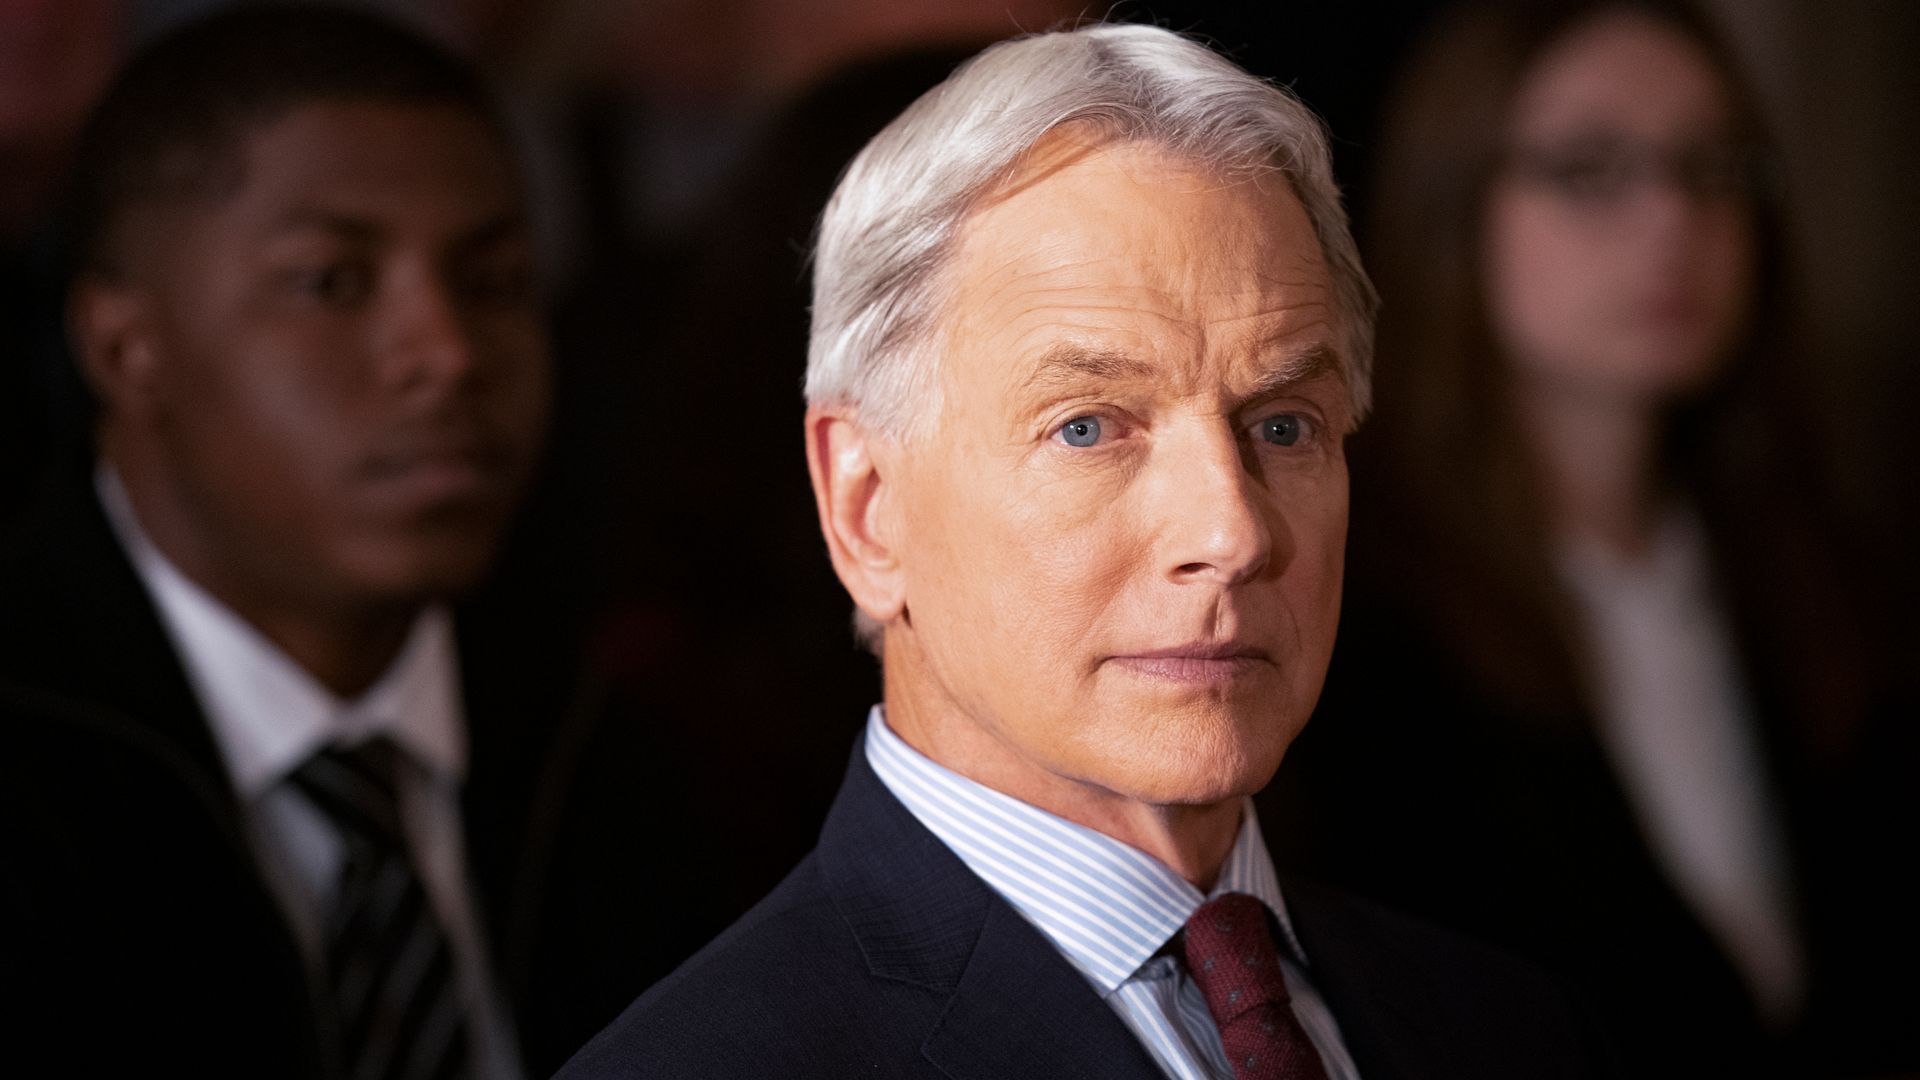 "Judge, Jury..." After entering cold case DNA into the system, Kasie solves a 30-year-old murder case, but a loophole in the legal system may set the suspect free. Also, McGee visits an elite technology company in Silicon Valley that is offering him a highly paid position, on NCIS, on the CBS Television Network. Pictured: Mark Harmon as NCIS Special Agent Leroy Jethro Gibbs.